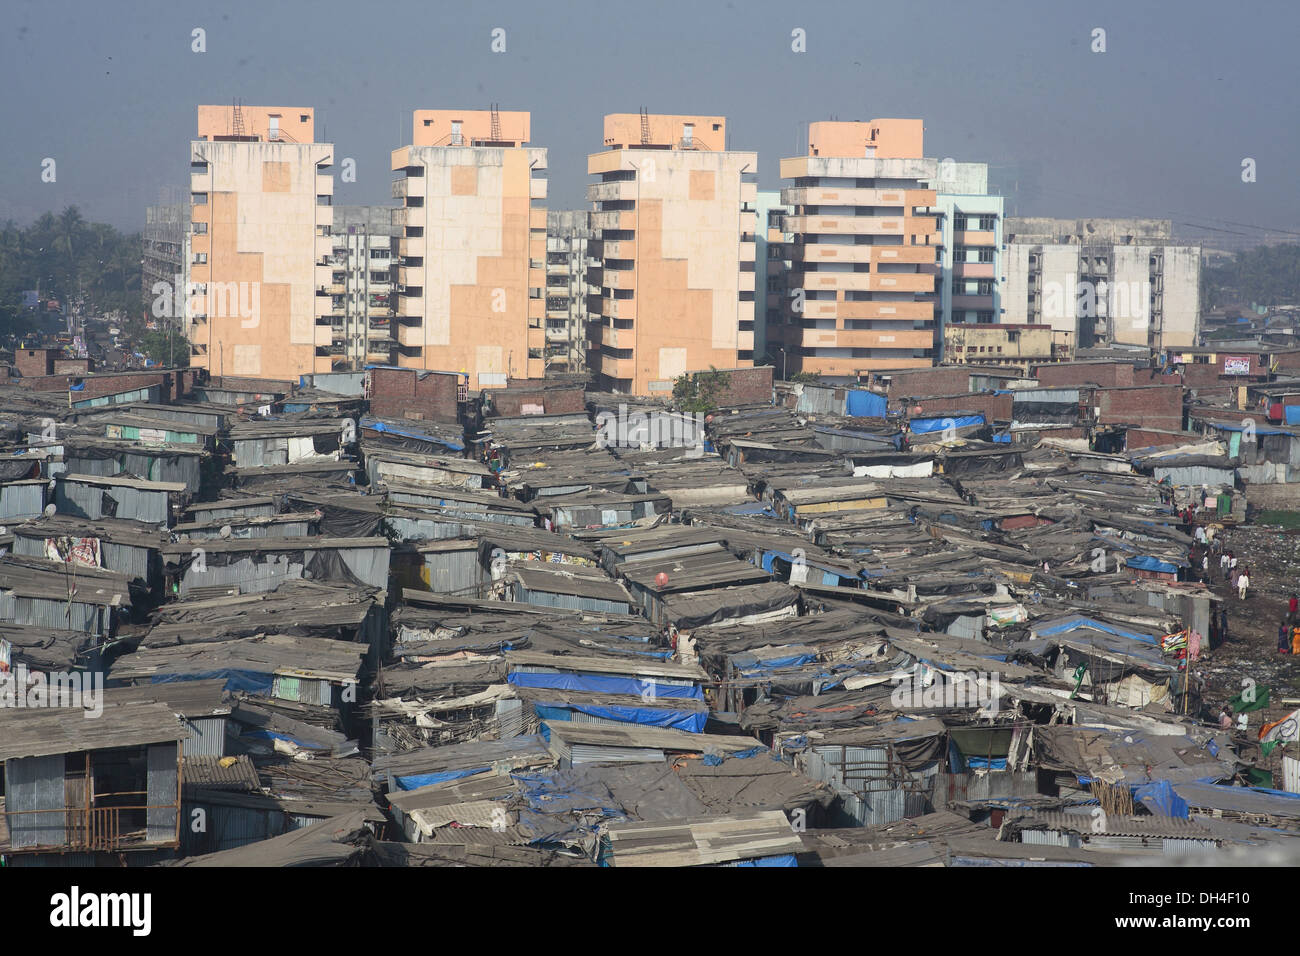 aerial-view-of-mankhurd-slums-and-modern-buildings-at-mumbai-india-DH4F10.jpg